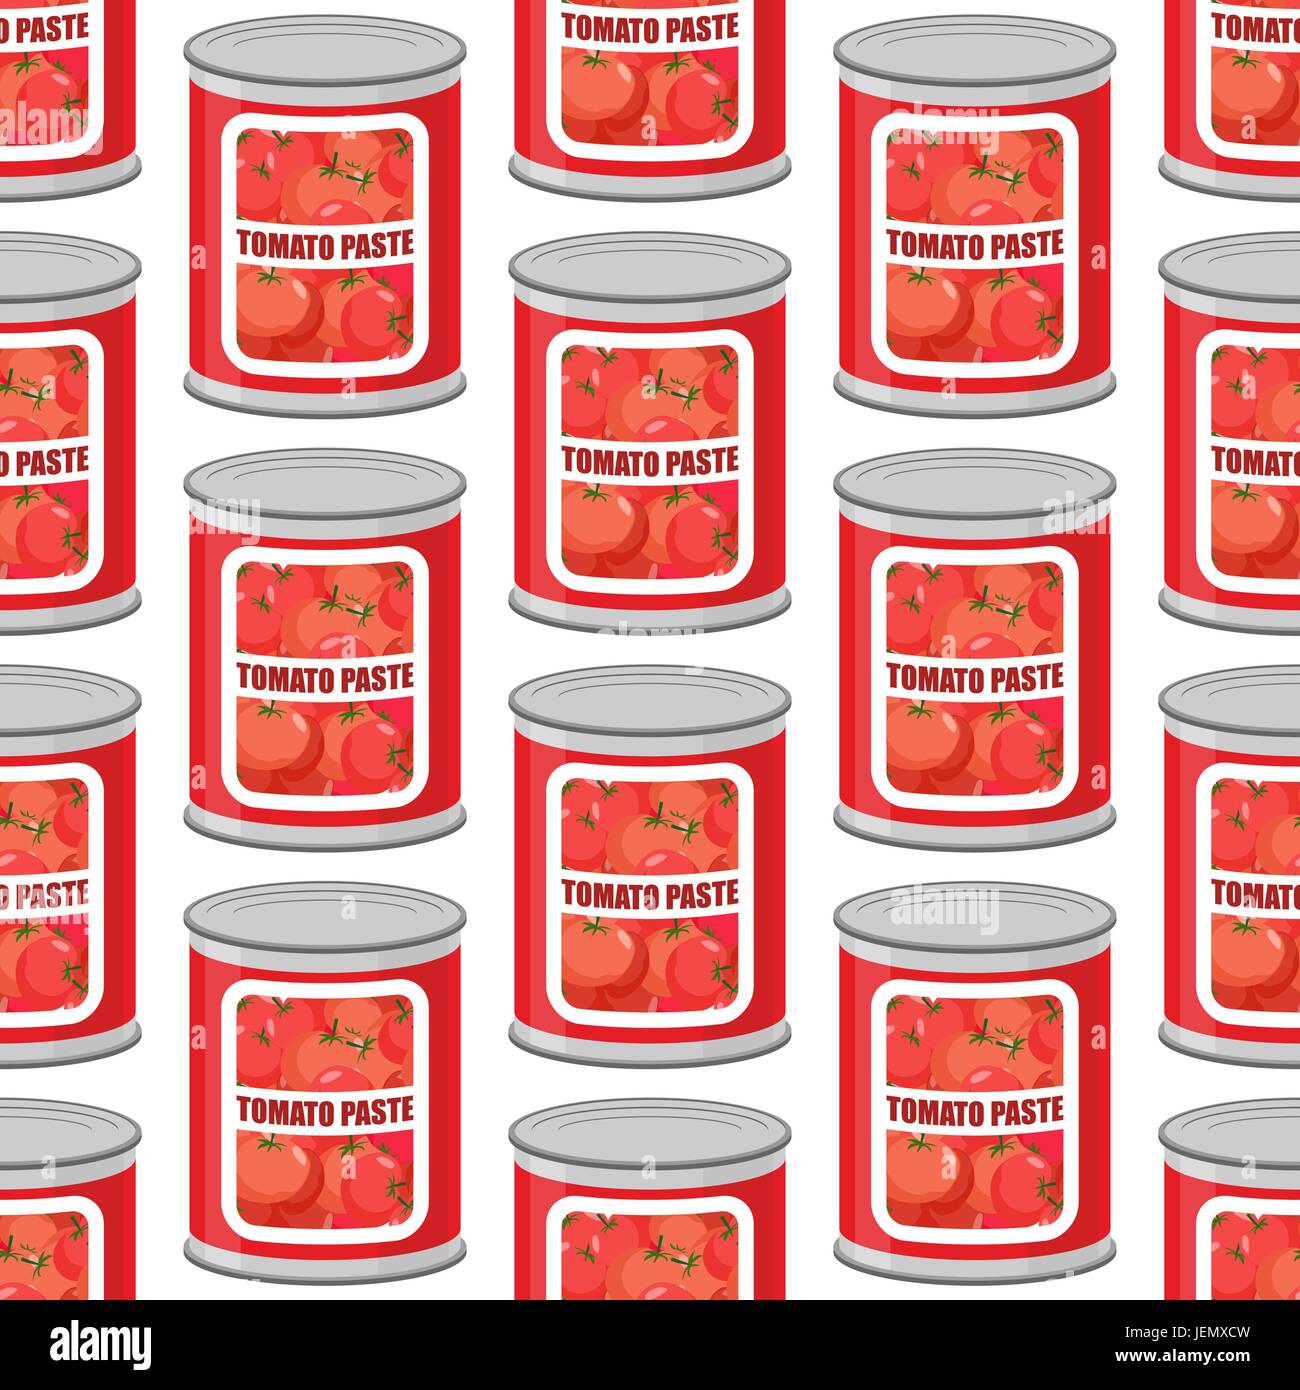 Tomato paste seamless pattern. Cans texture. Iron pot with tomatoes Stock Vector